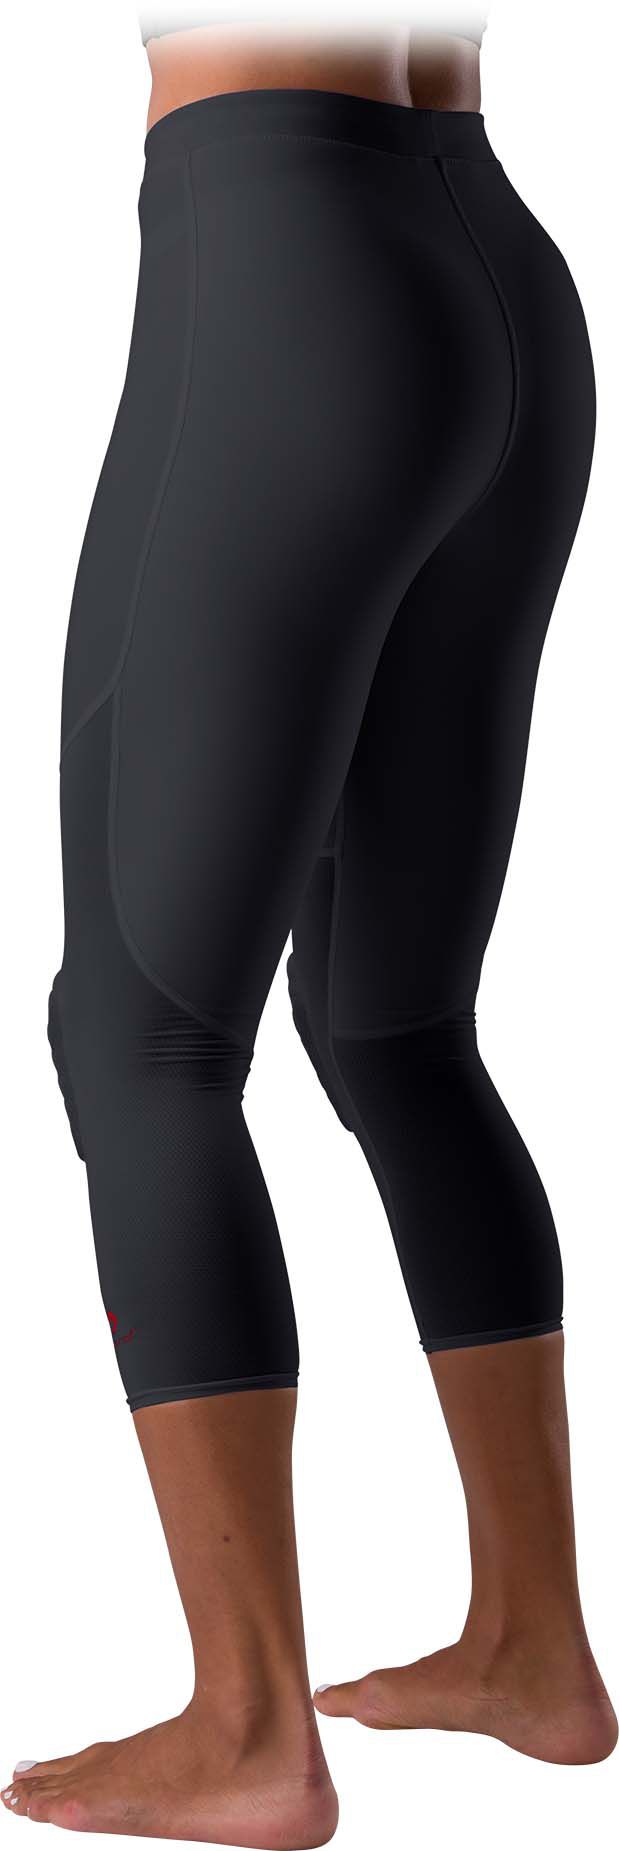 Dick's Sporting Goods Mcdavid Women's HEX 2-Pad 3/4 Basketball Tights with  Knee Pads